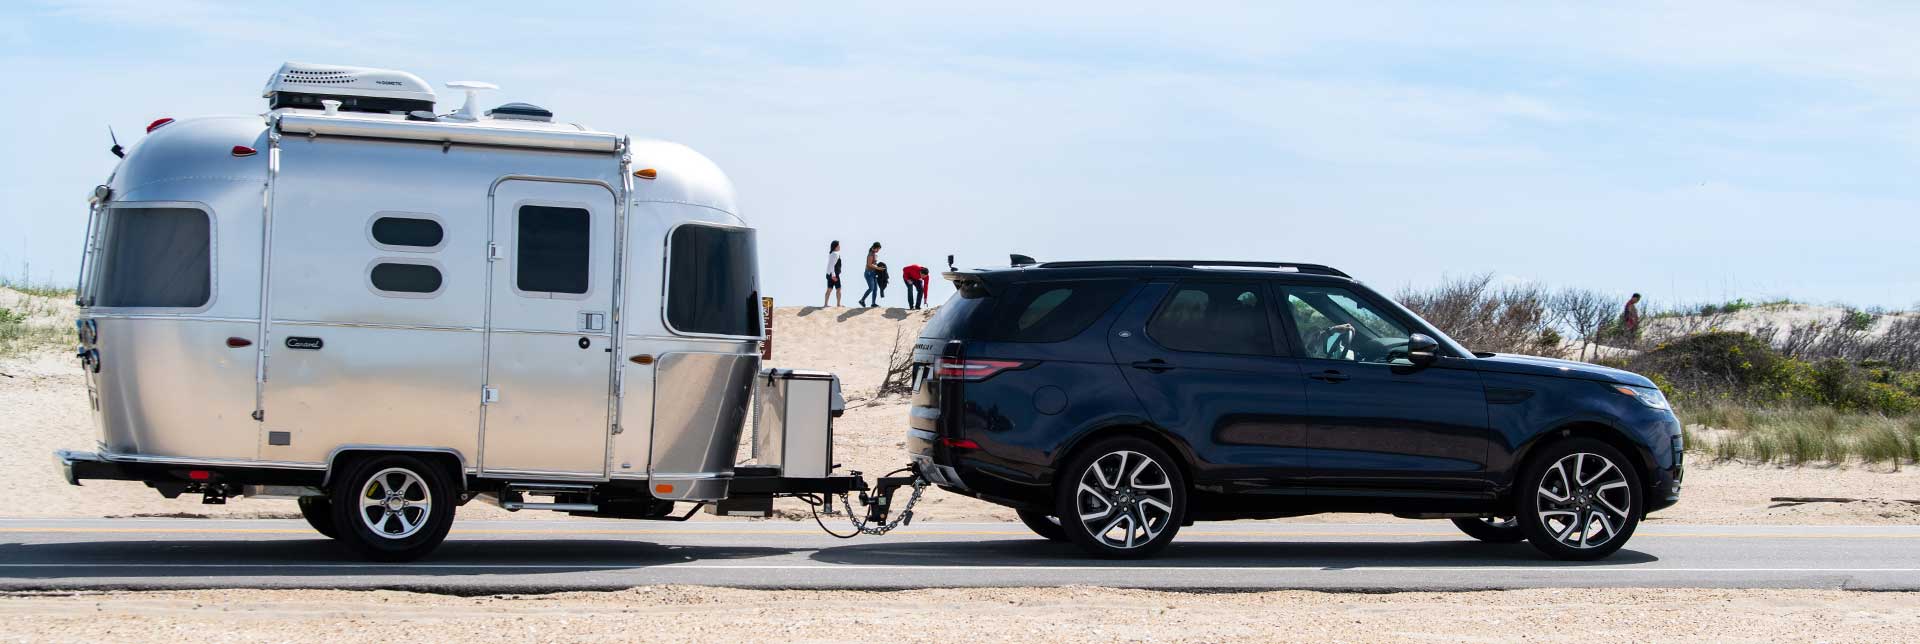 Airstream being pulled by an SUV